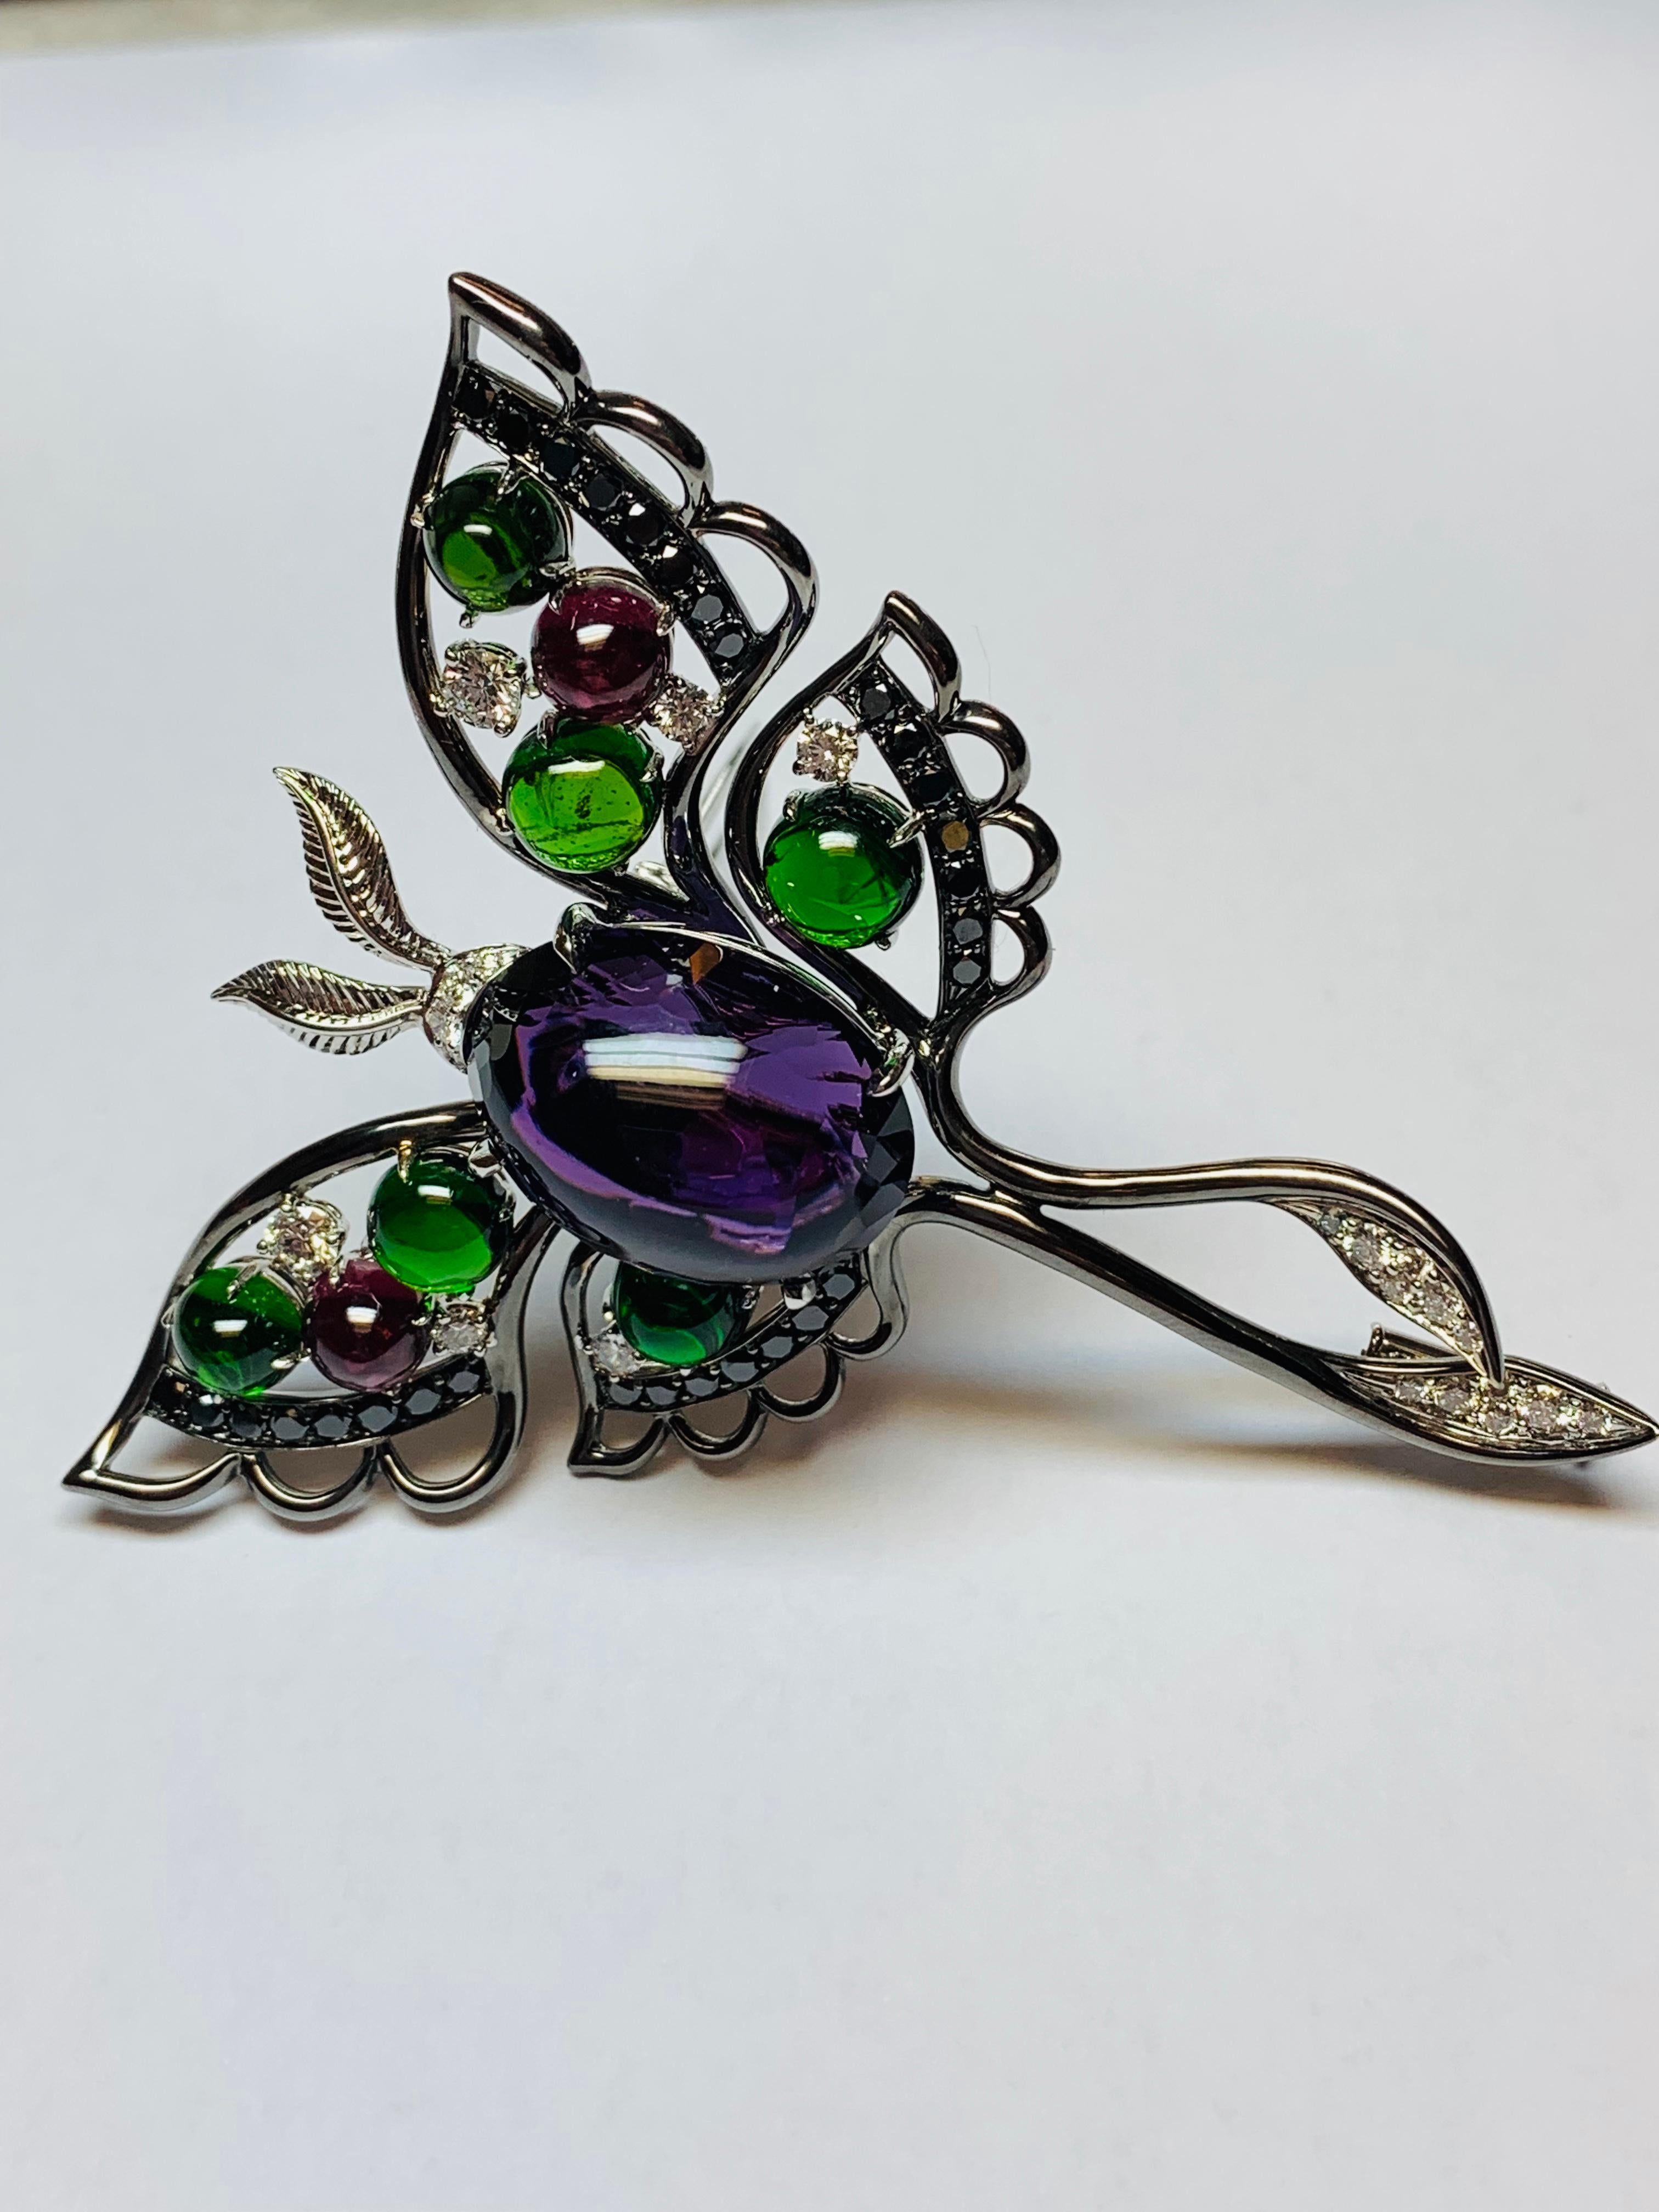 This one off piece is magnificent! Highlighted with a large cabochon cut Amethyst in the center, surrounded by cabochon Chrome Tourmalines and Rhodolite Garnets and finished off with a sprinkle of Black and White diamonds. We have Oxidized (